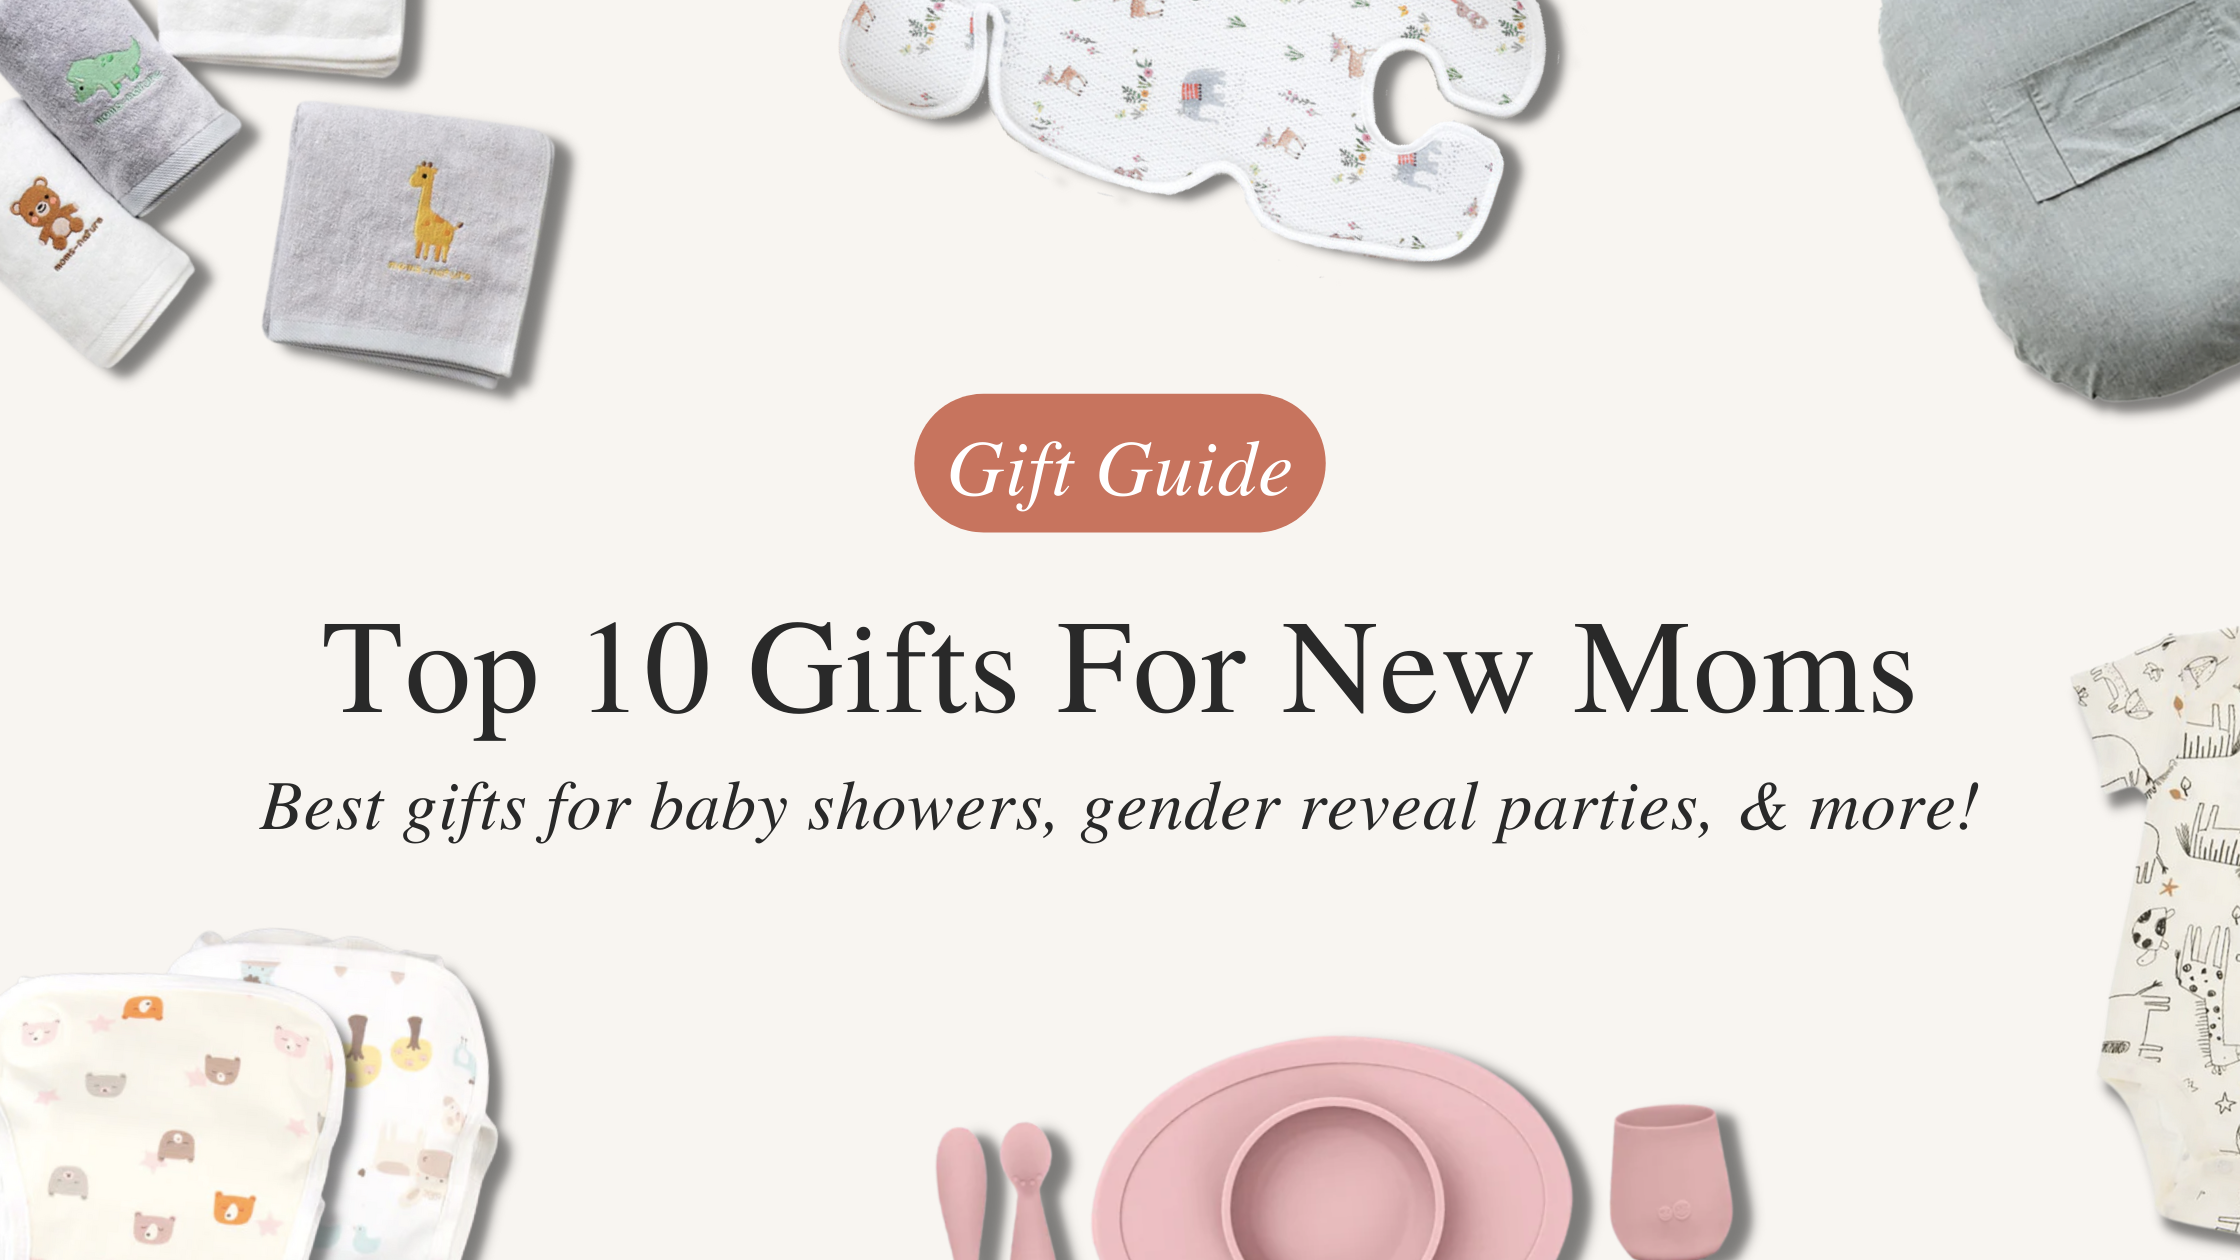 Gift Guide: Top 10 Gifts For New Moms